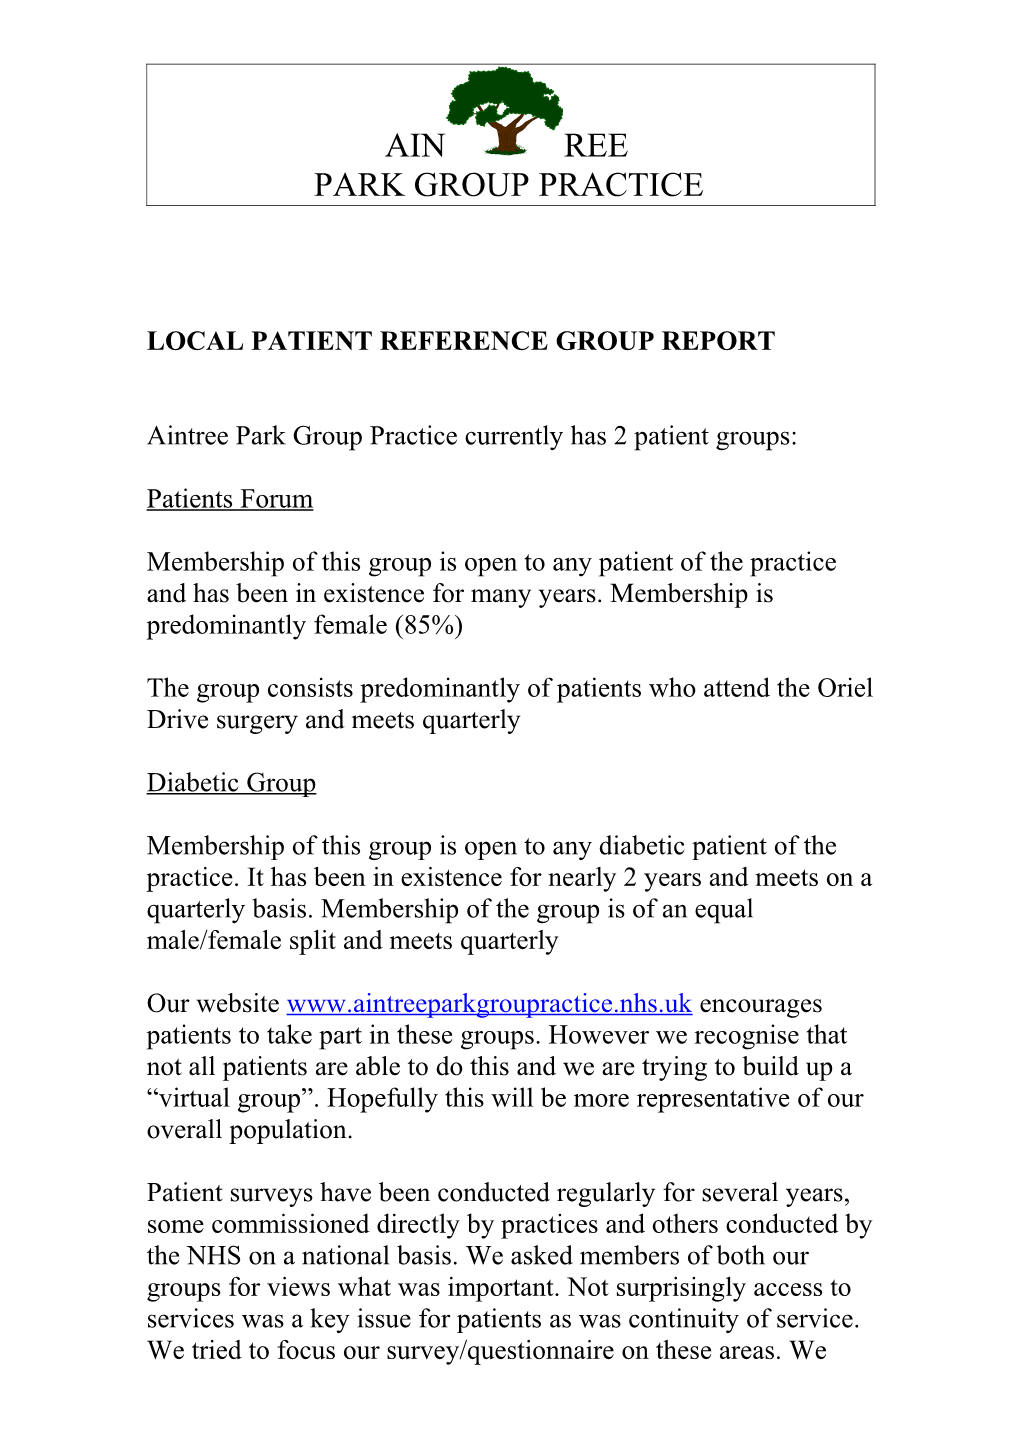 Local Patient Reference Group Report